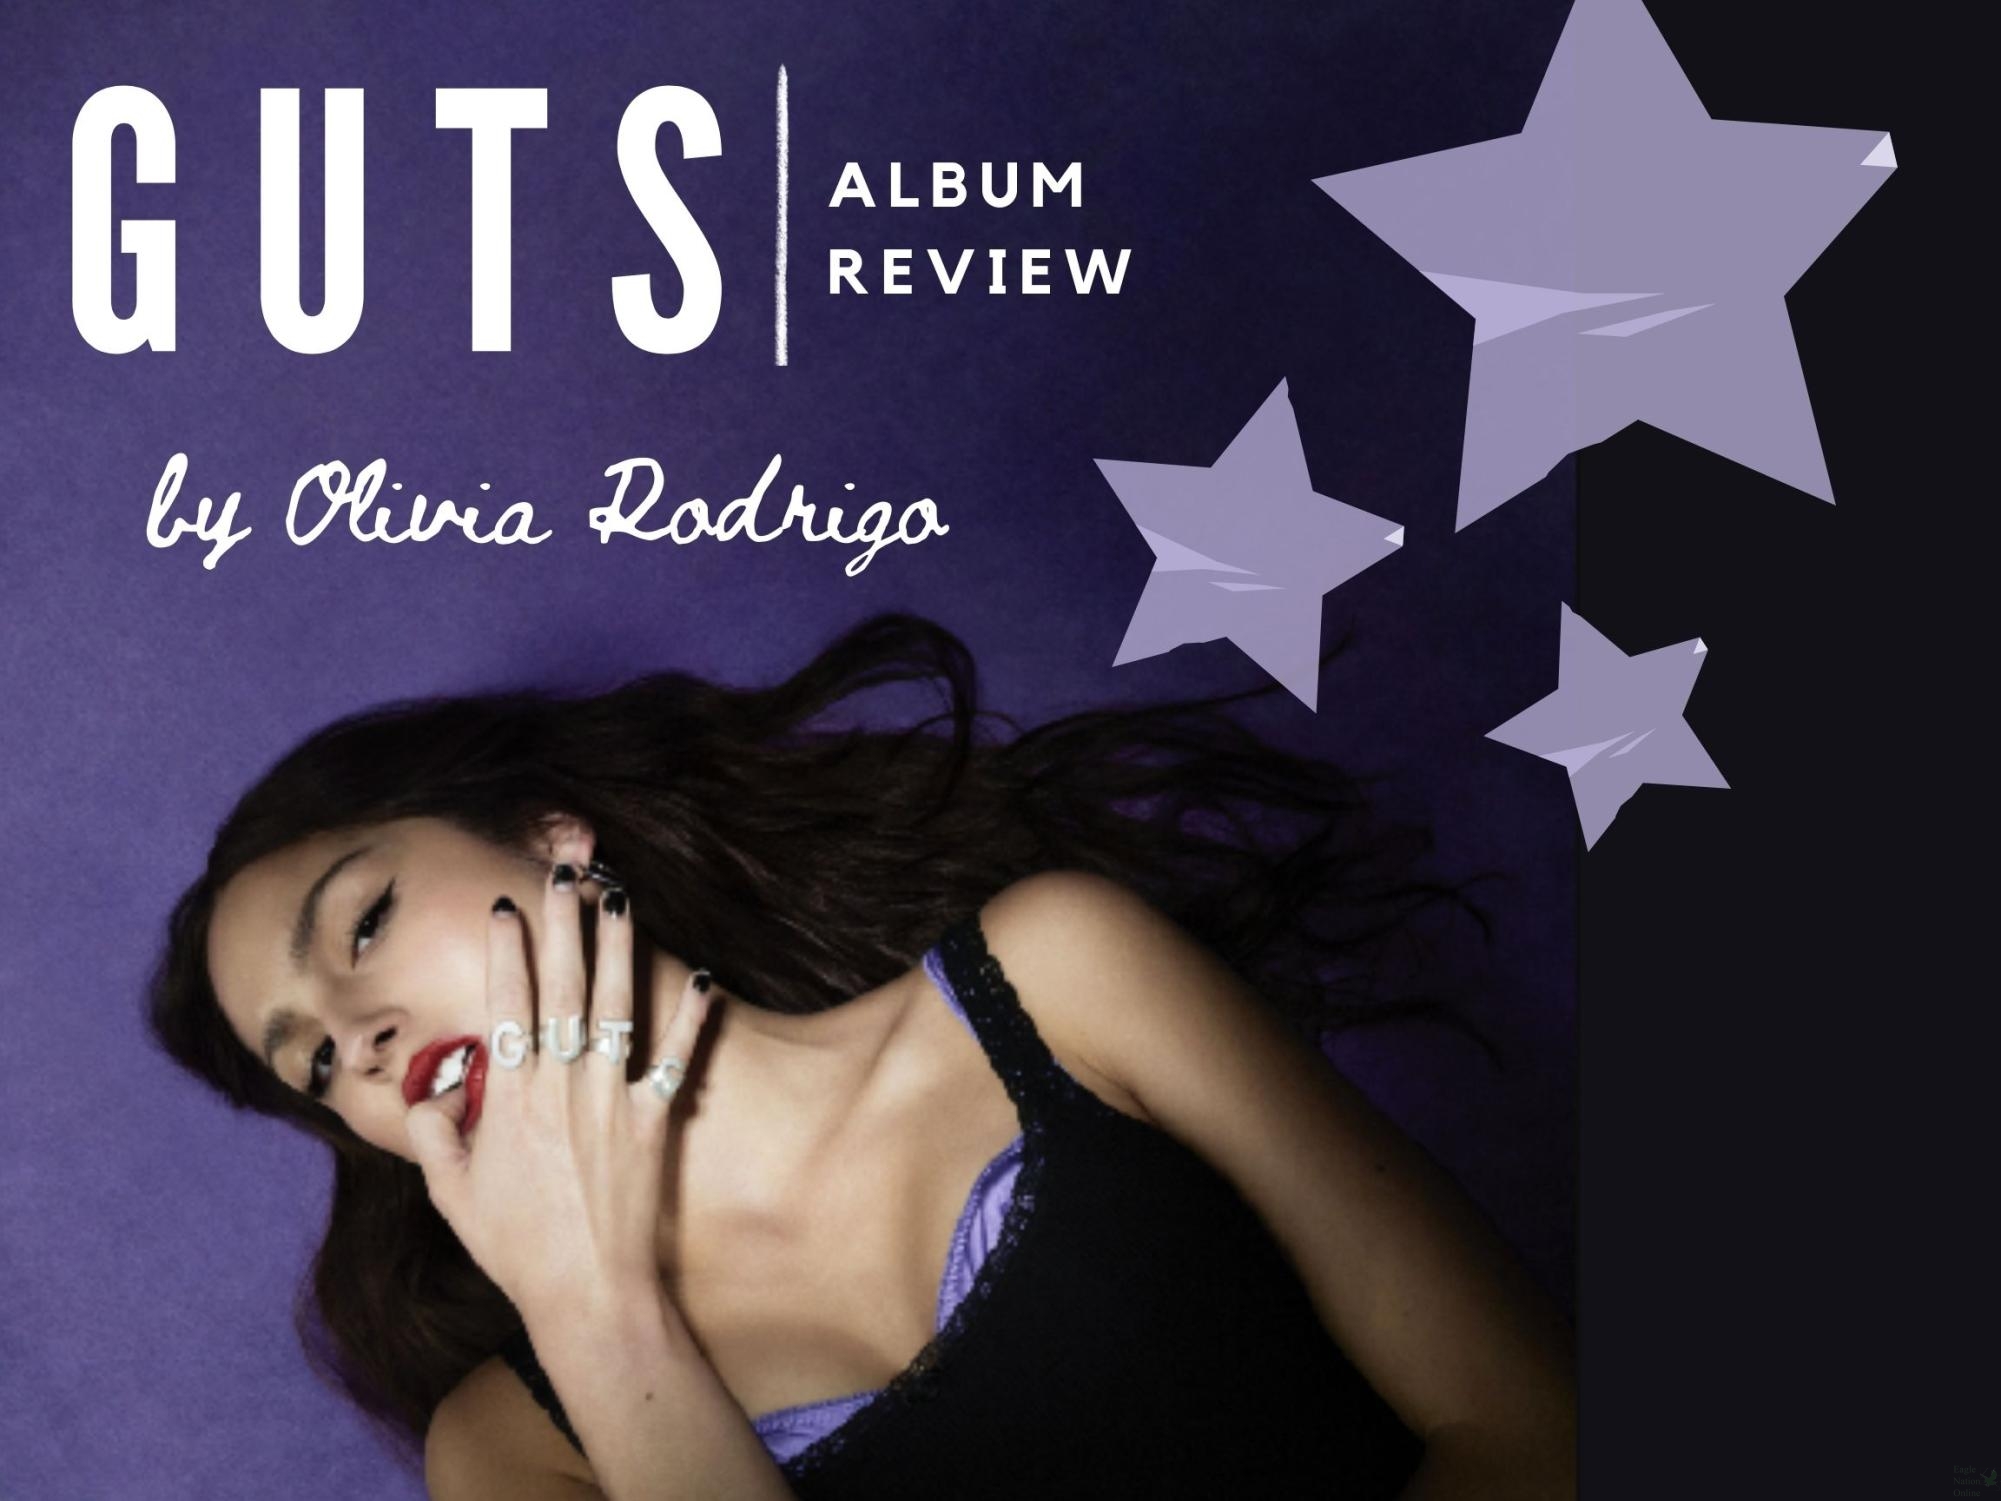 The graphic above, created by Tess Gagliano, features Olivia Rodrigos GUTS album cover. The album was released on Sept. 8 through Getten Records. Rodrigo will perform this album live on her 2024 world tour .